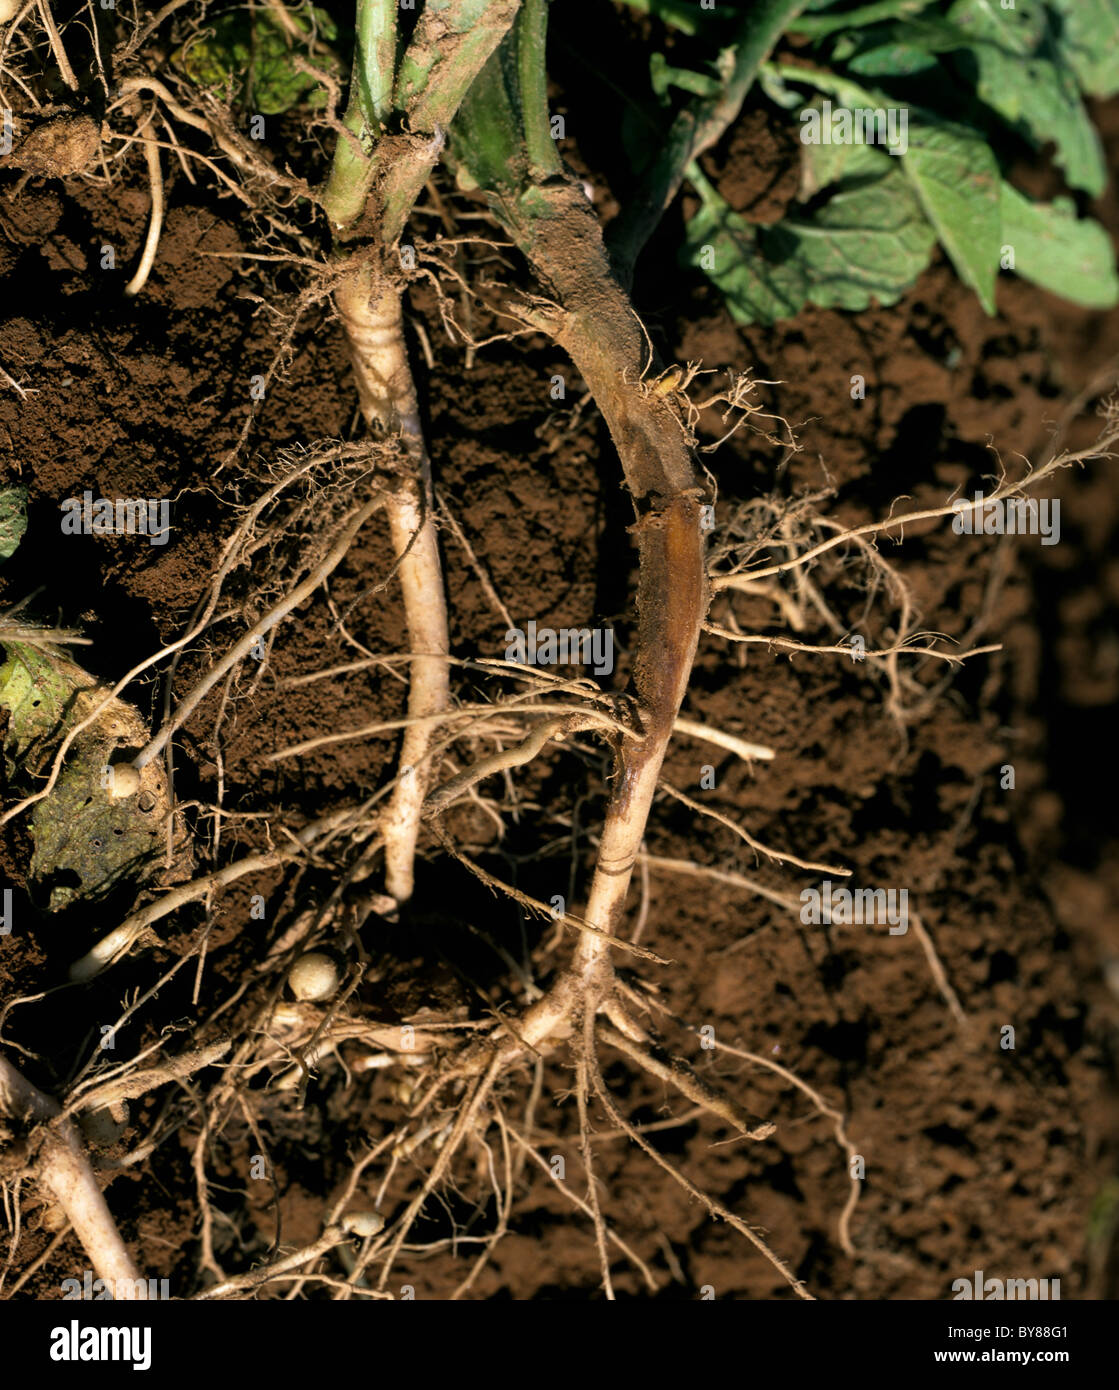 Stem canker (Rhizoctonia solani) lesions on the roots and lower stem of a potato plant Stock Photo